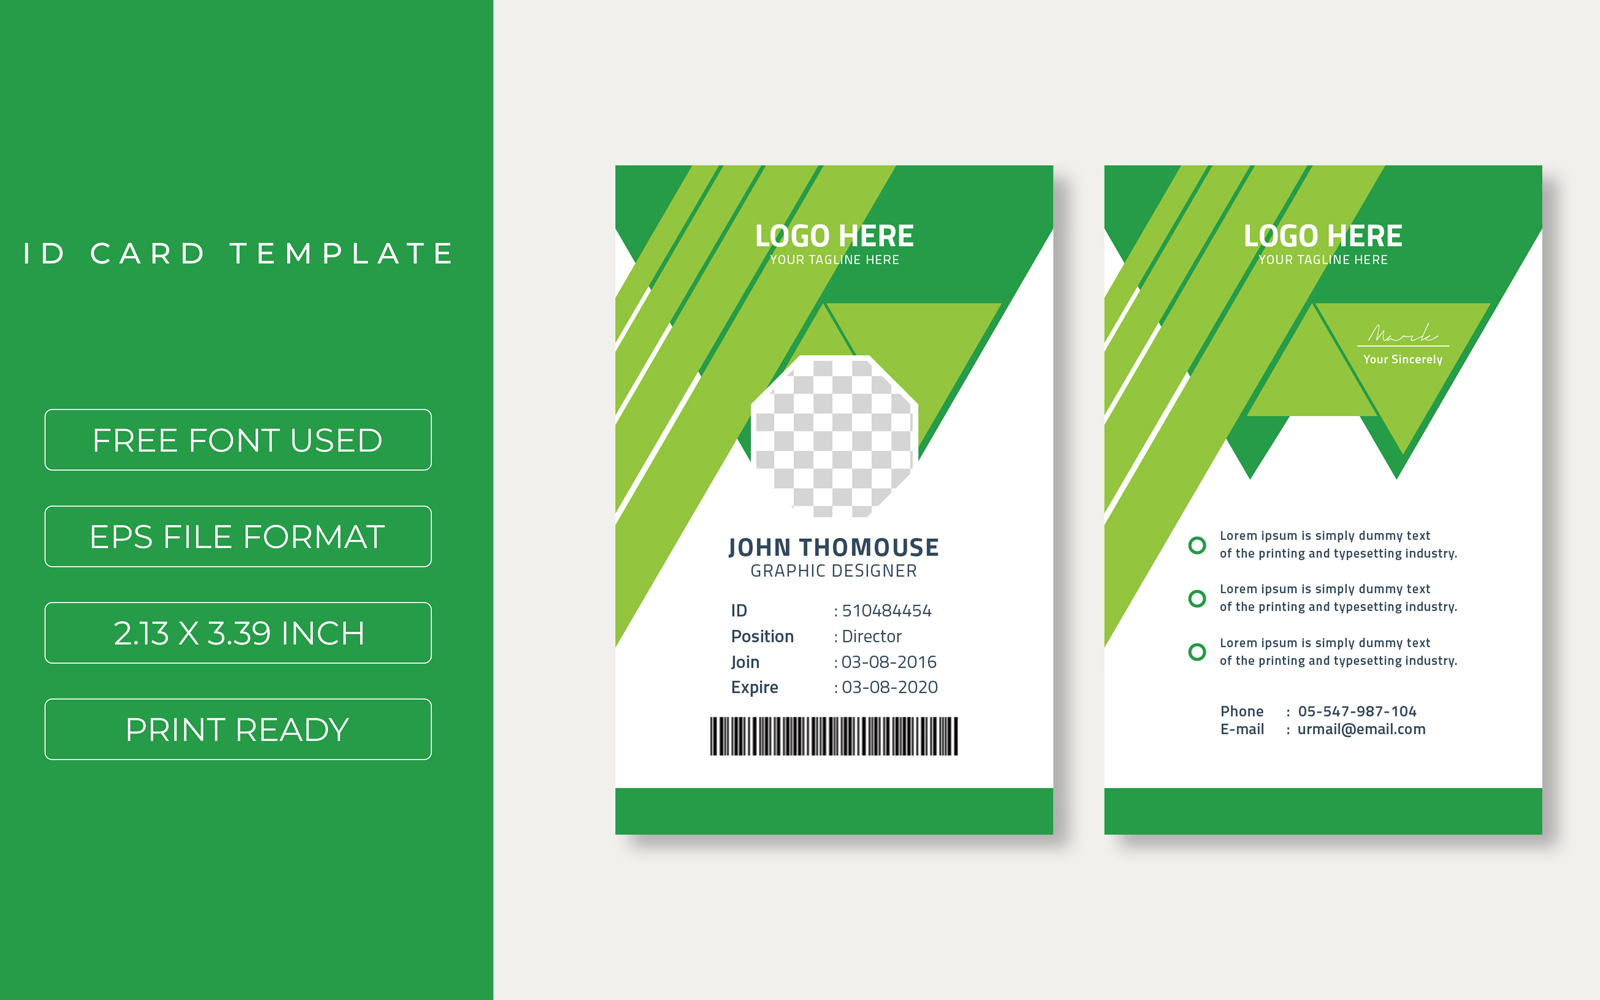 Corporate Id Card Layout With Green Accents